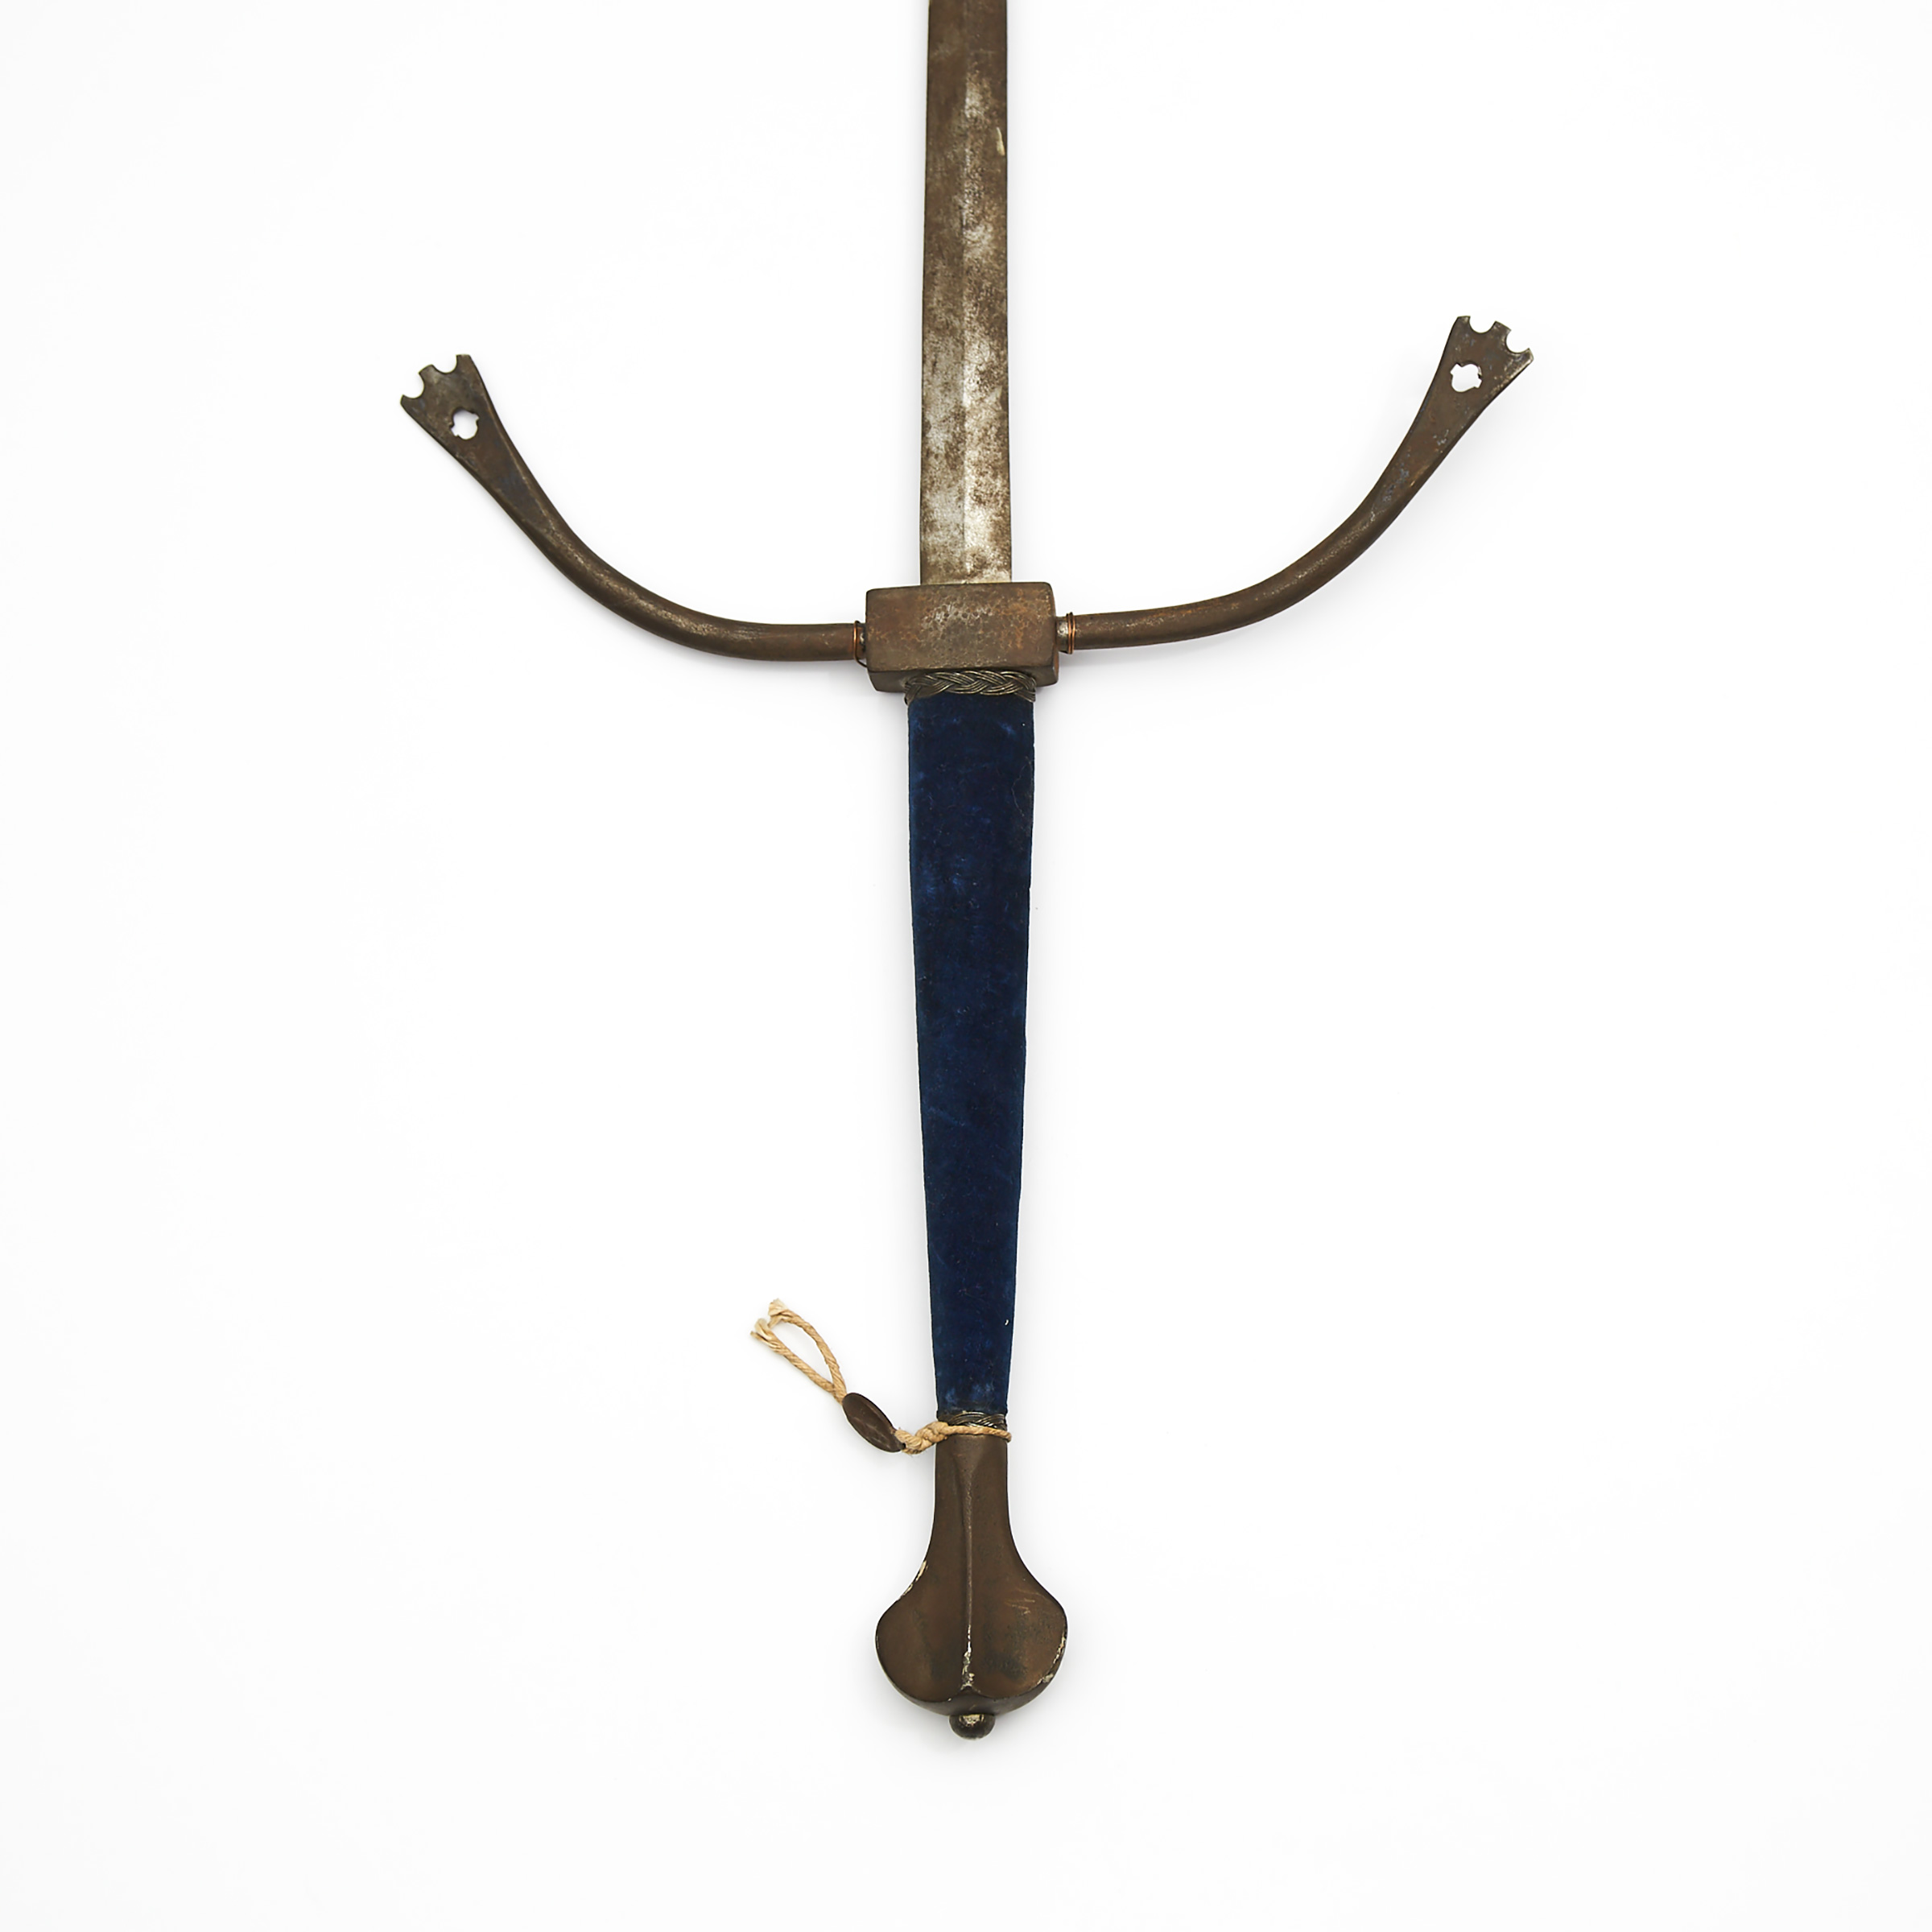 Victorian 16th Century German Style Two Handed Sword, 19th century